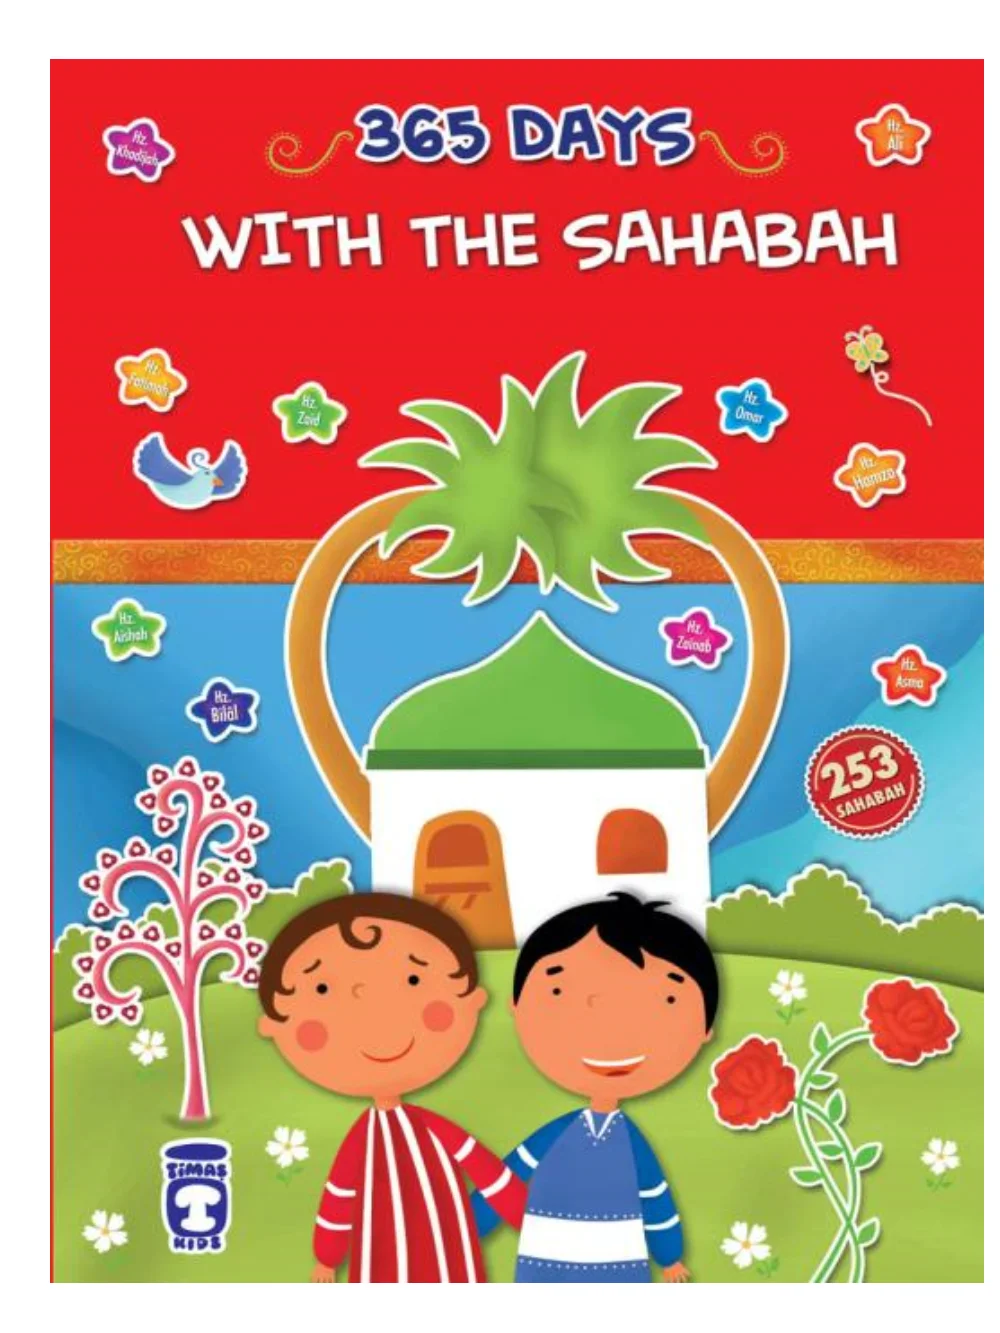 365 Days With the Sahabah - Nazmi Taha Kılınc - Islamic children's book - English book - 464 pages - nice gift for children